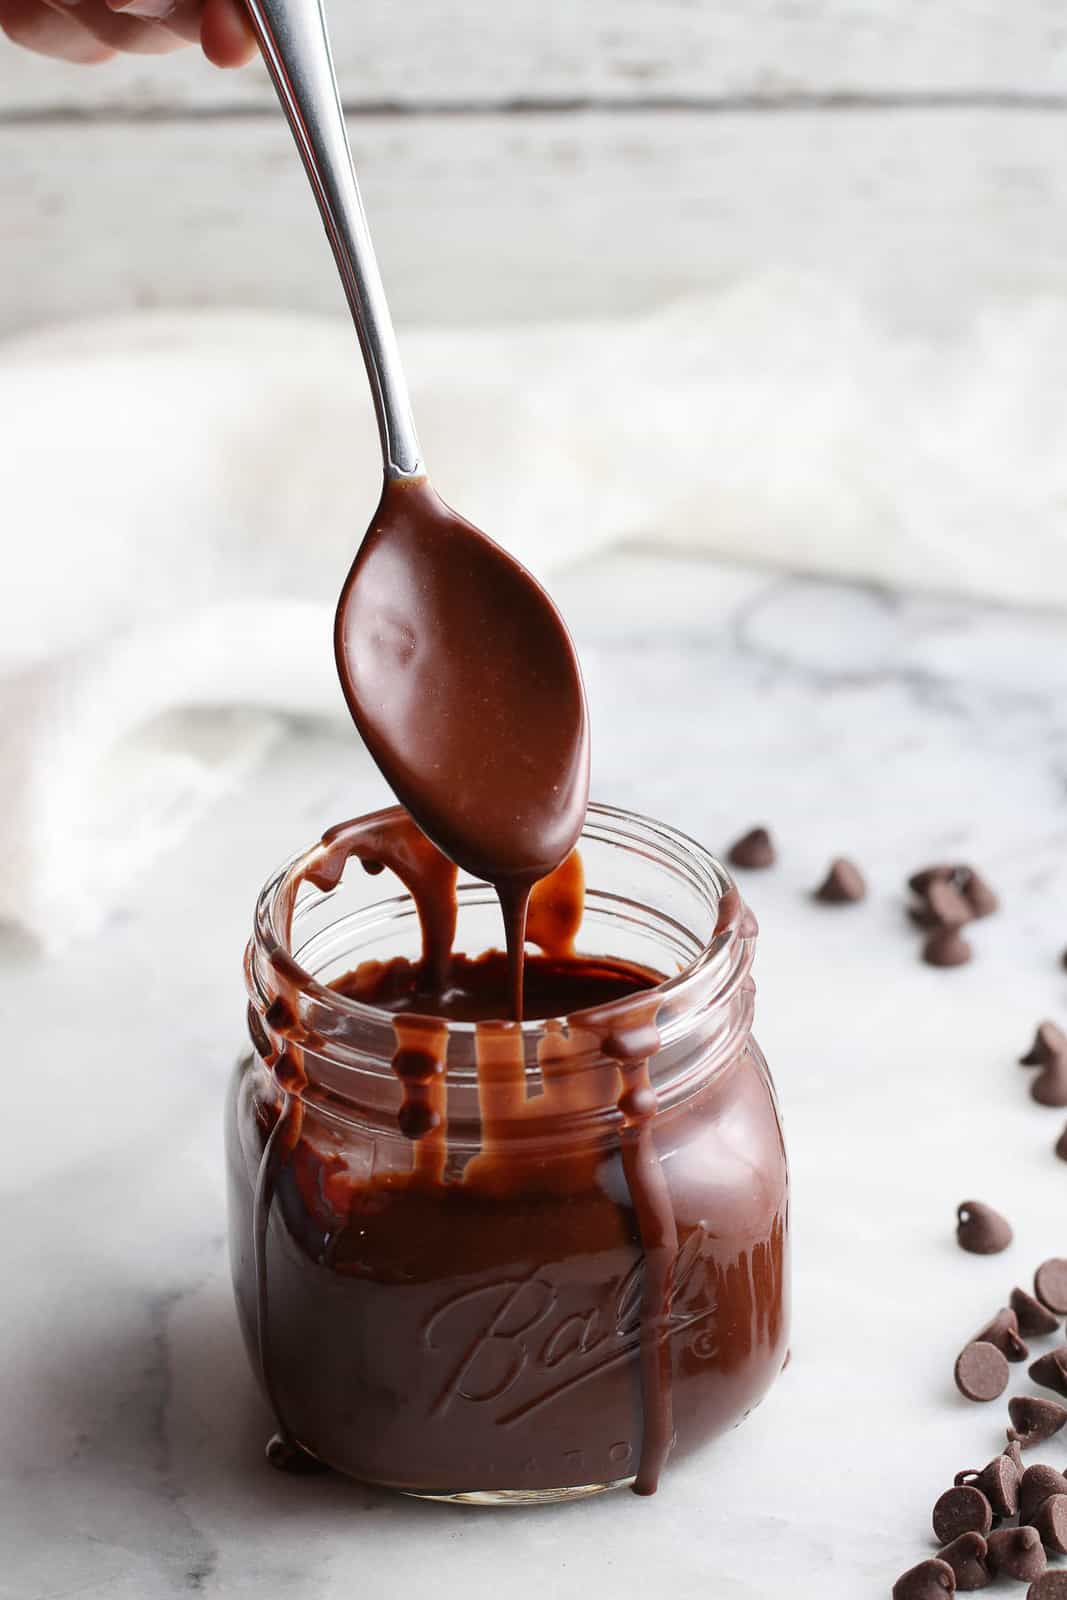 side photo showing silver spoon dripping chocolate sauce into a clear mason jar on a marble background